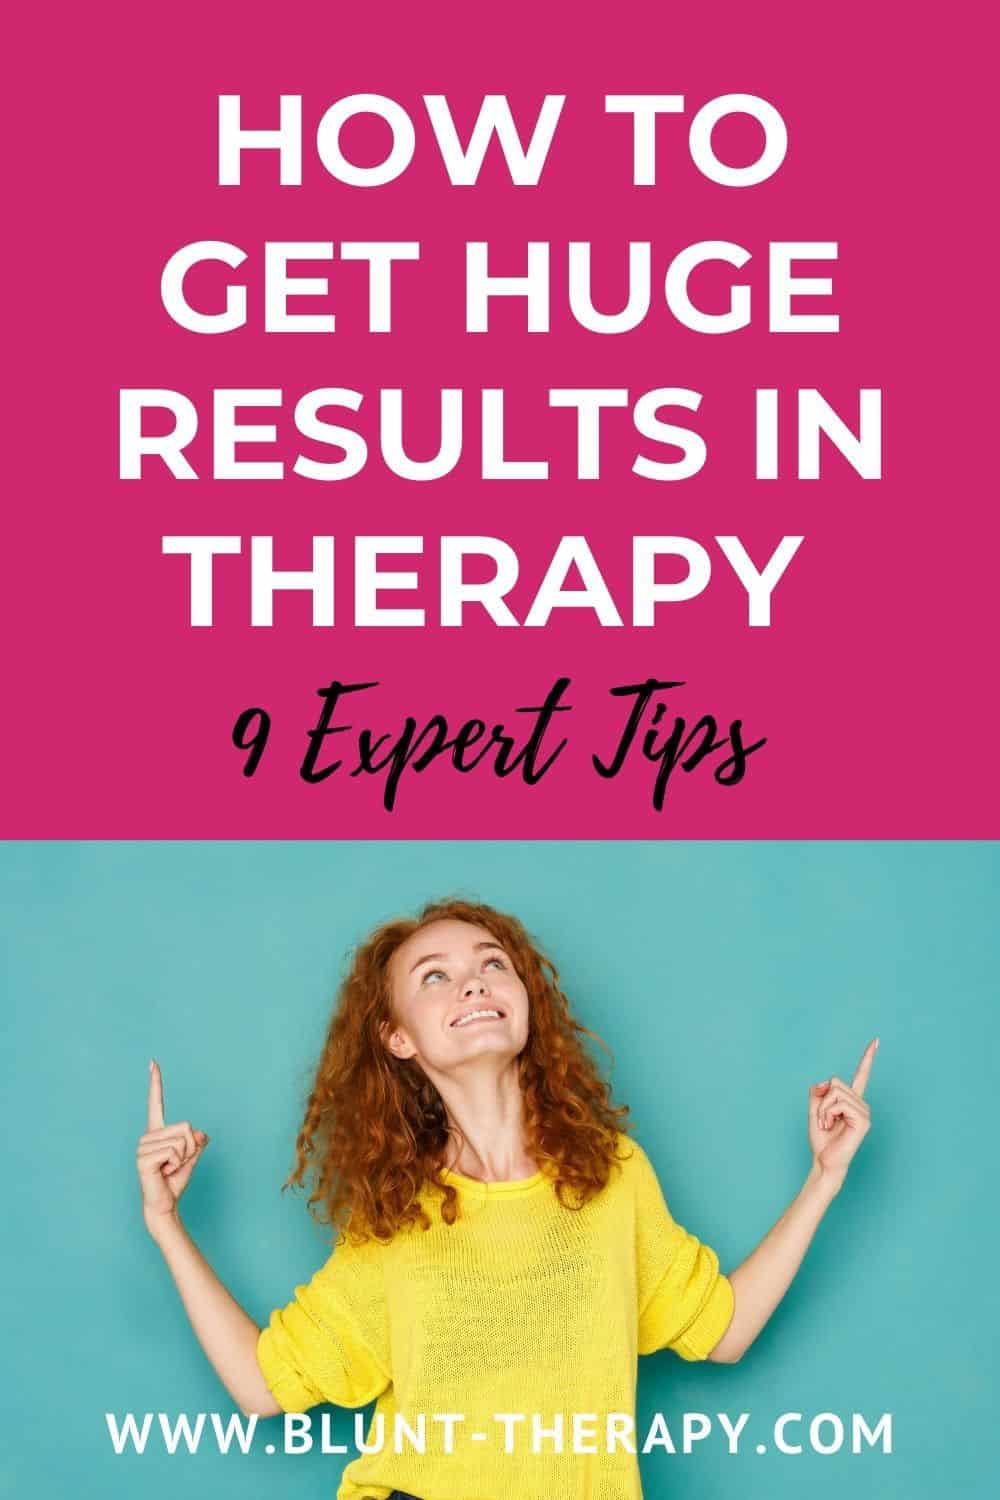 How To Get Huge Results In Therapy